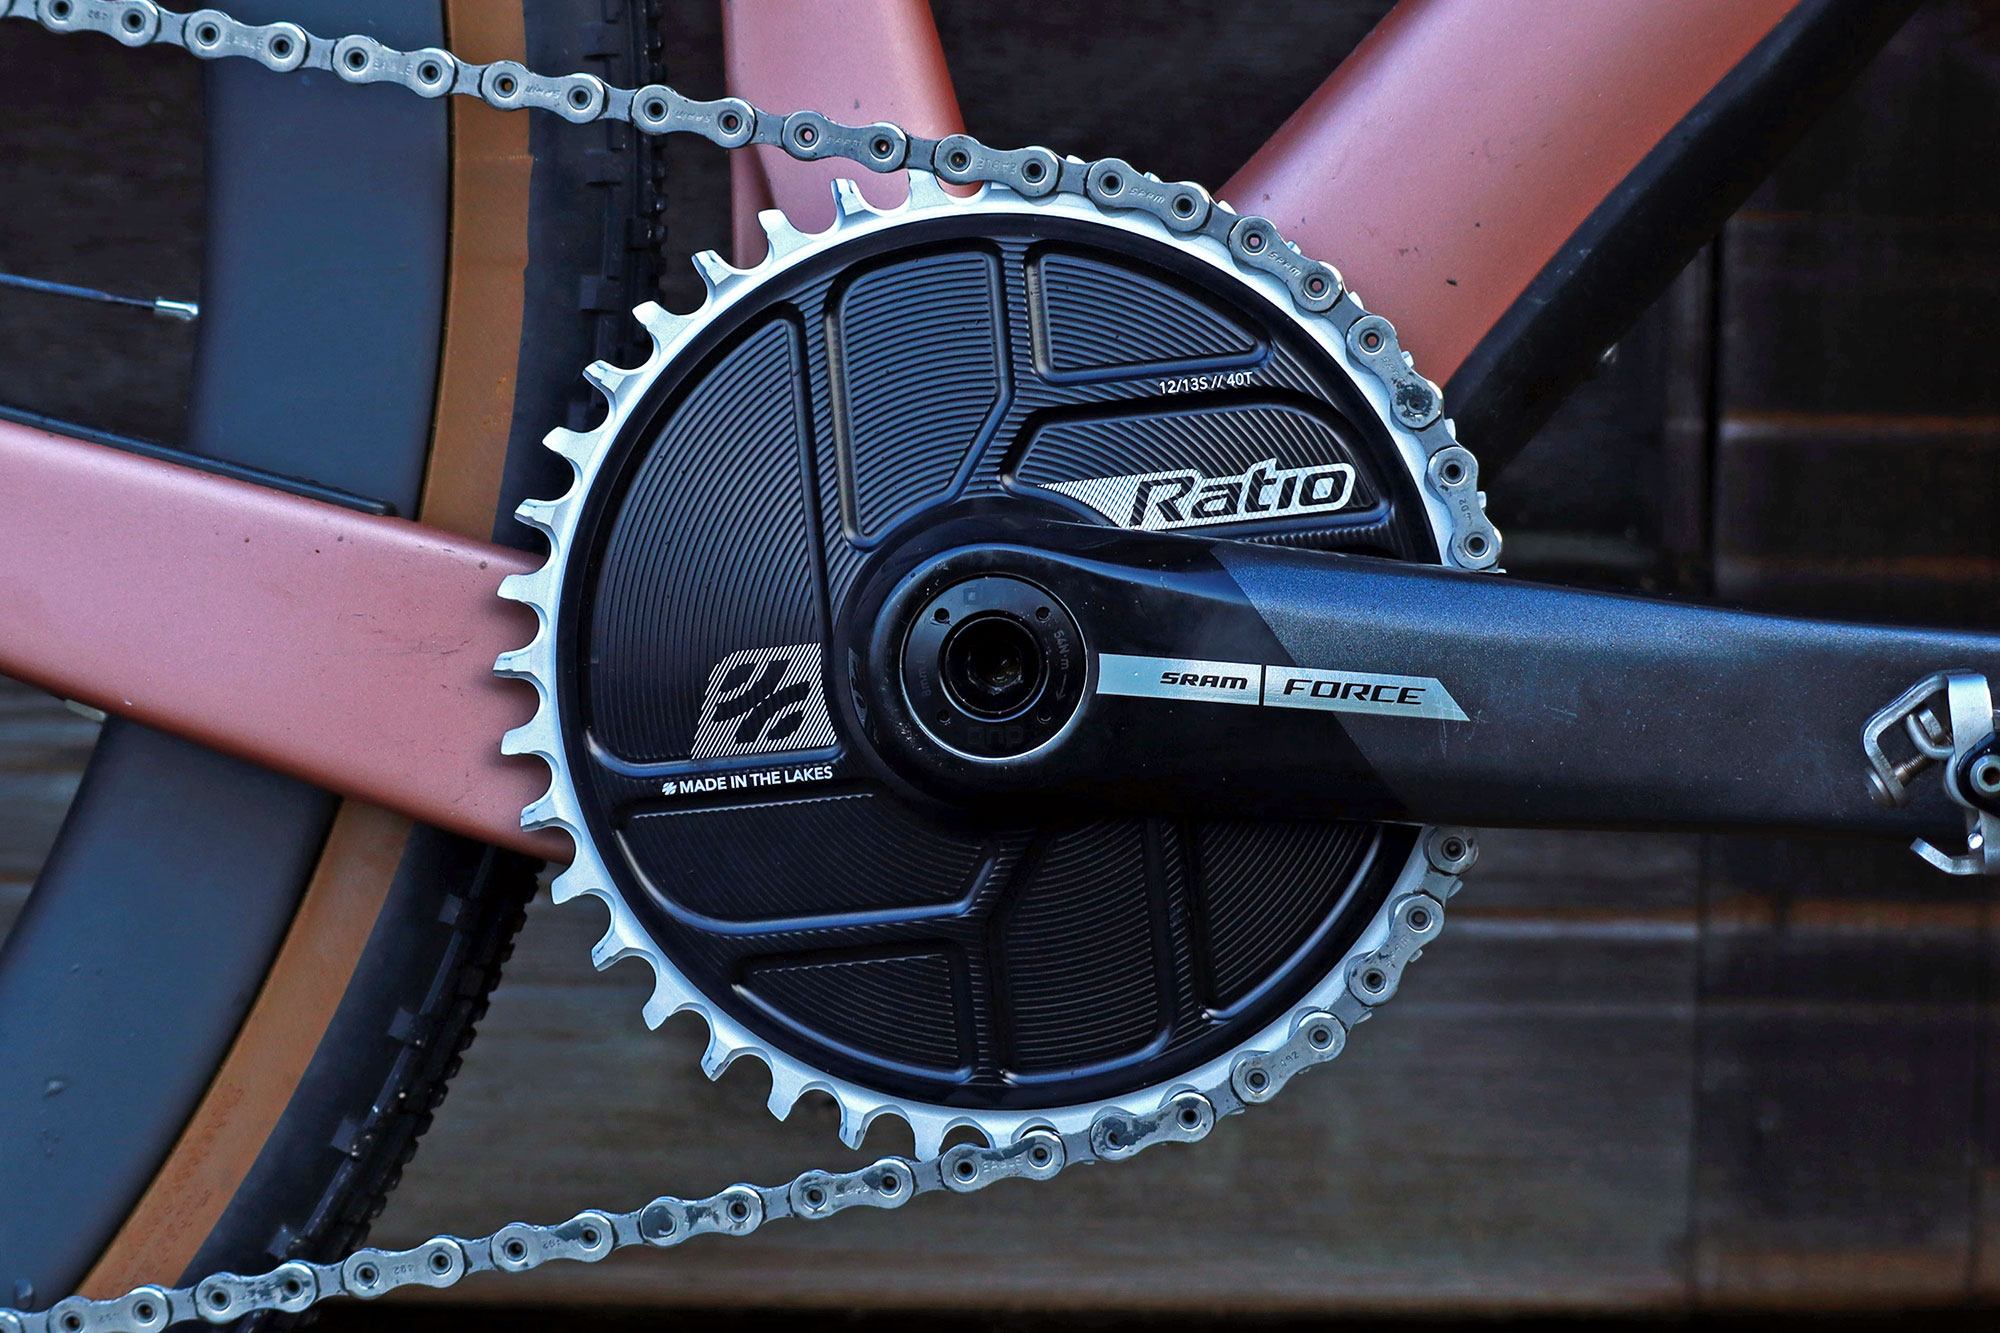 Ratio Fits Aero Direct Mount 1x Chainrings to ALL 12 & 13 Speed Drivetrains